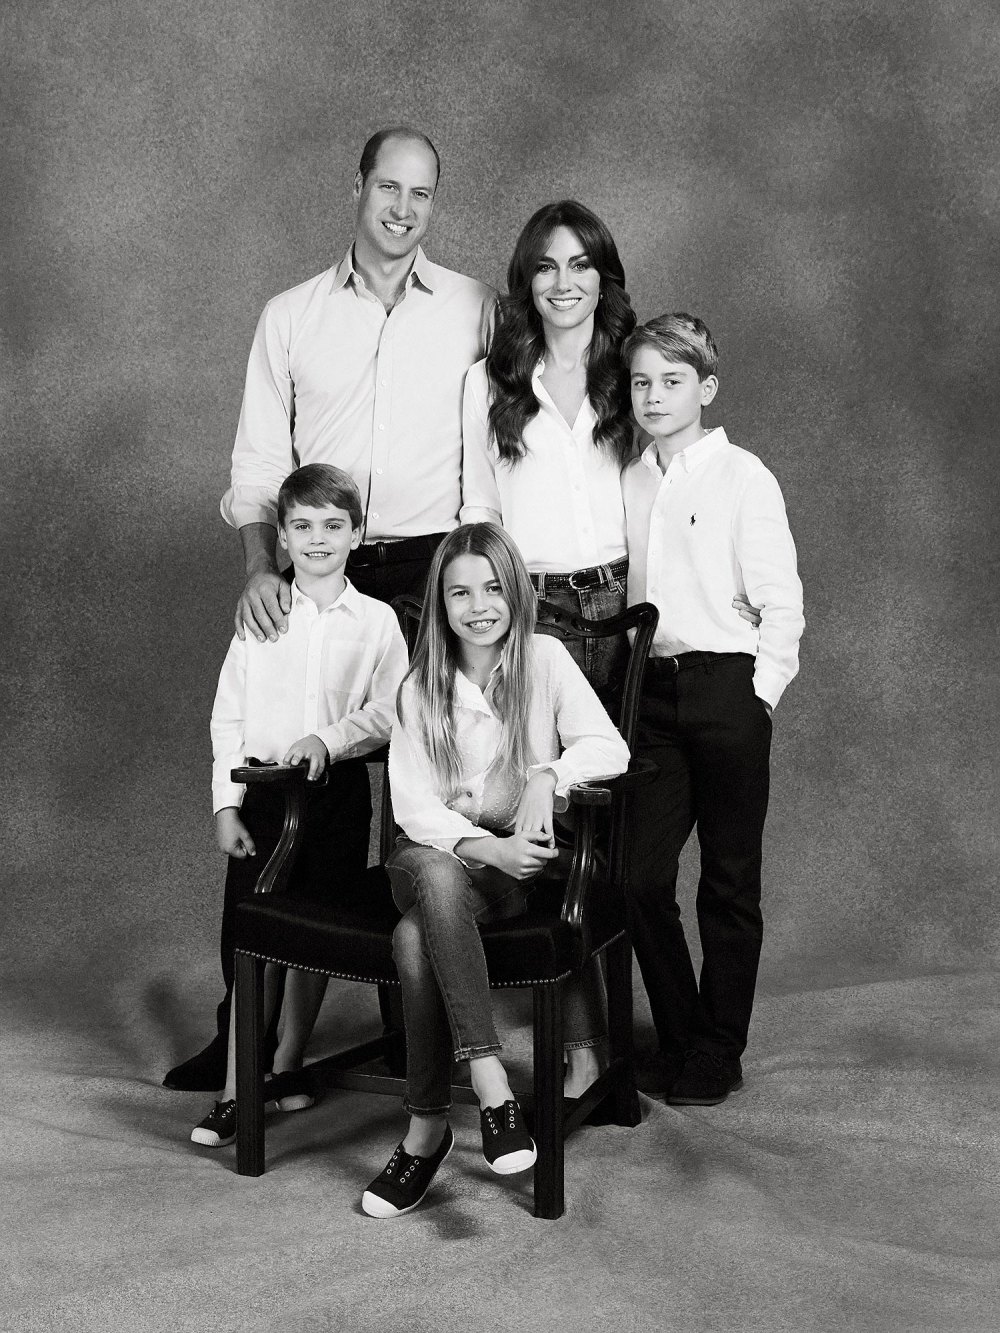 Prince William and Princess Kate Middleton Are ‘Embarrassed’ Over Holiday Card Photoshop Fail